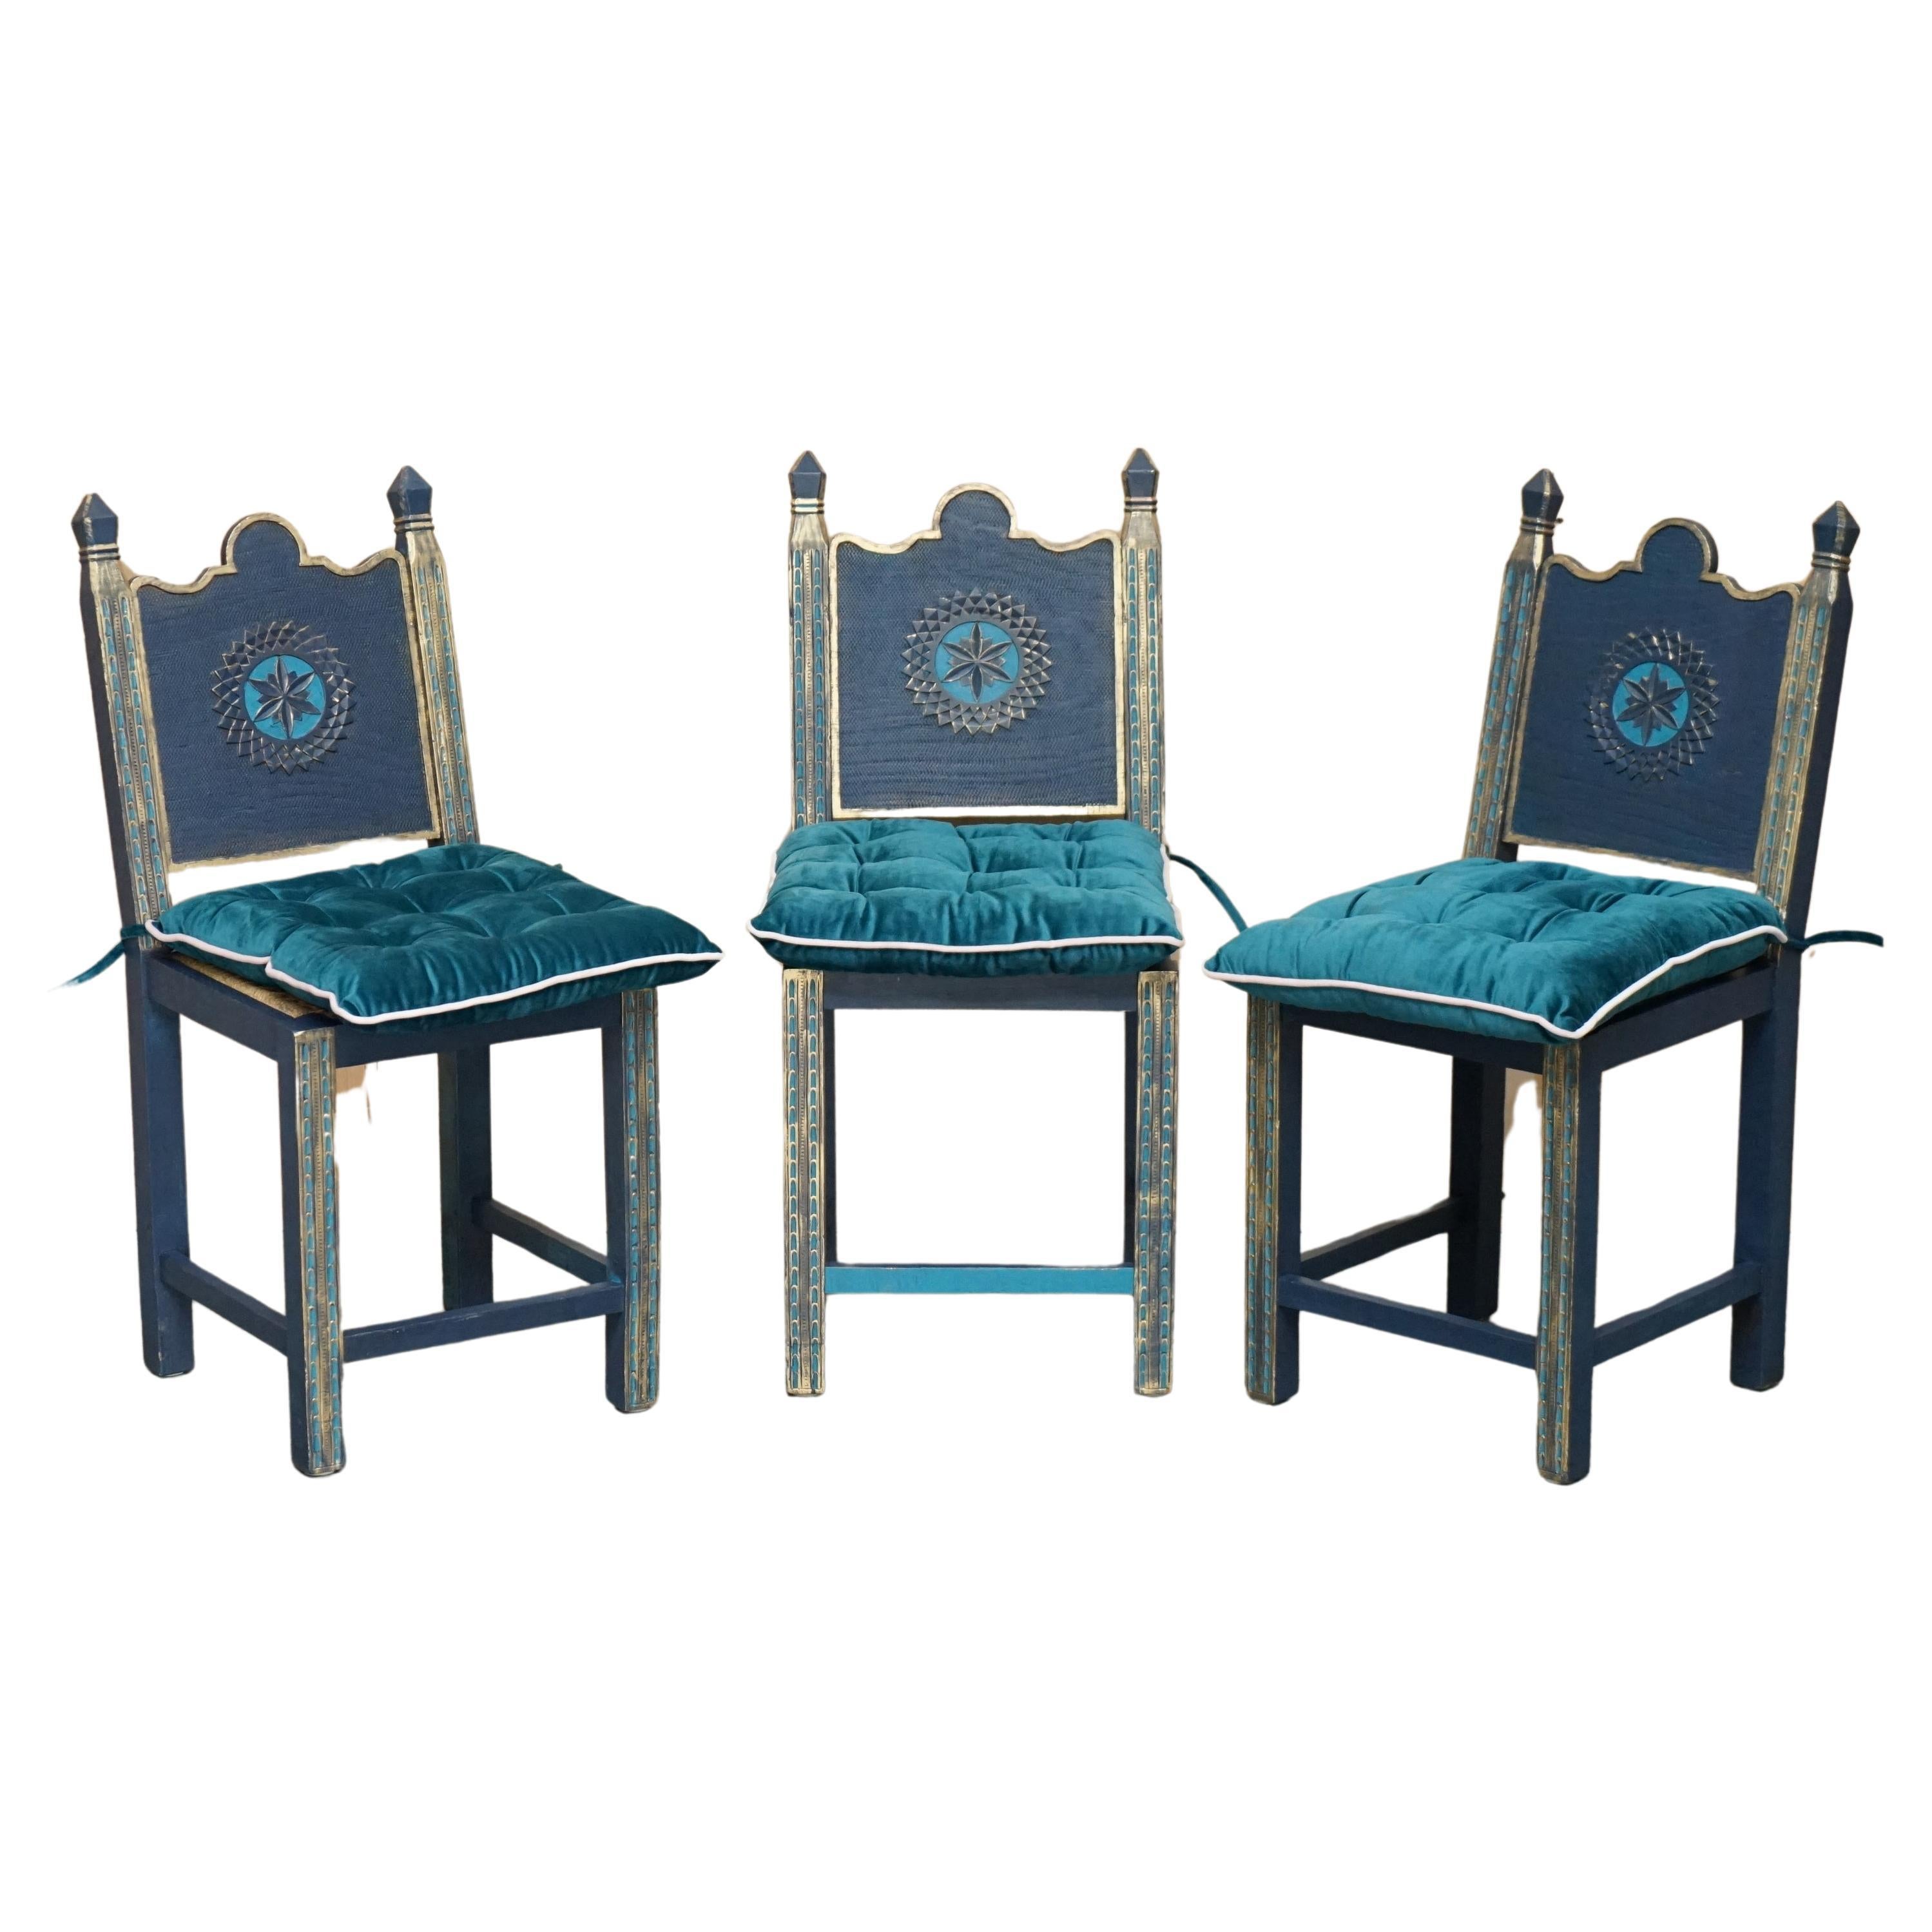 SUITE OF THREE HIGH SEAT HAND PAINTED SiDE CHAIRS IN THE GOTHIC REVIval TASTE im Angebot